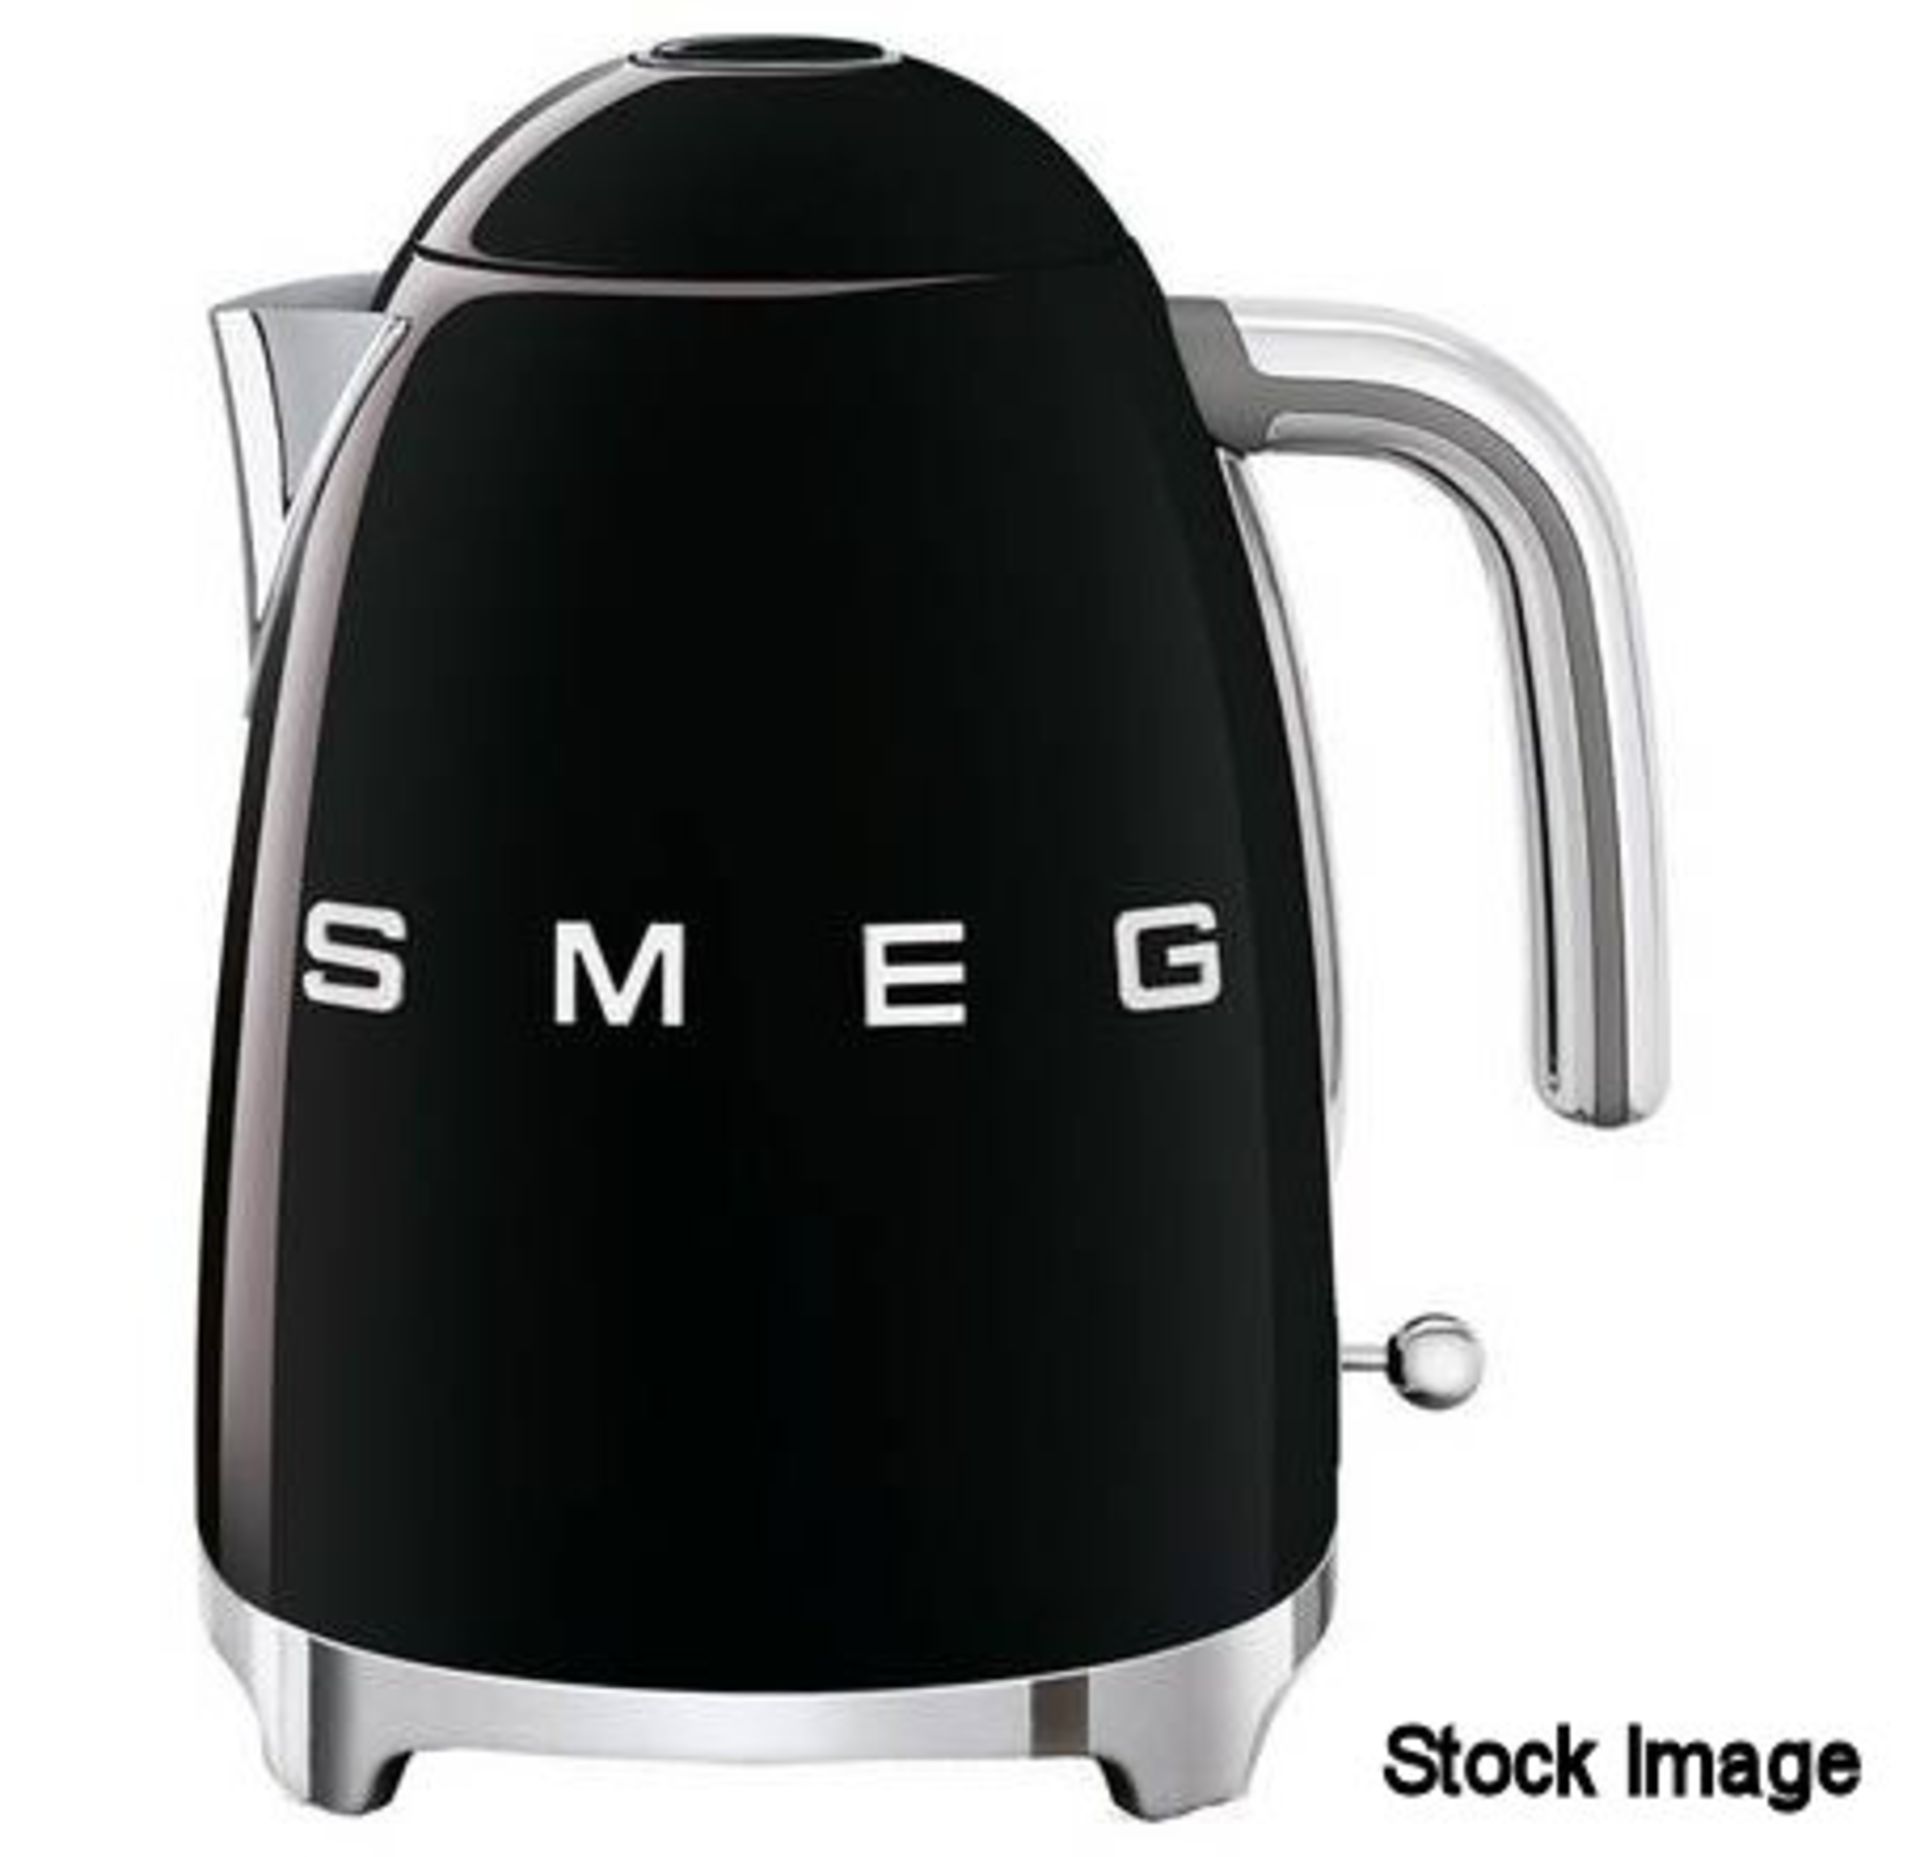 1 x SMEG 50'S Style Kettle In Black - Boxed - Original RRP £149.00